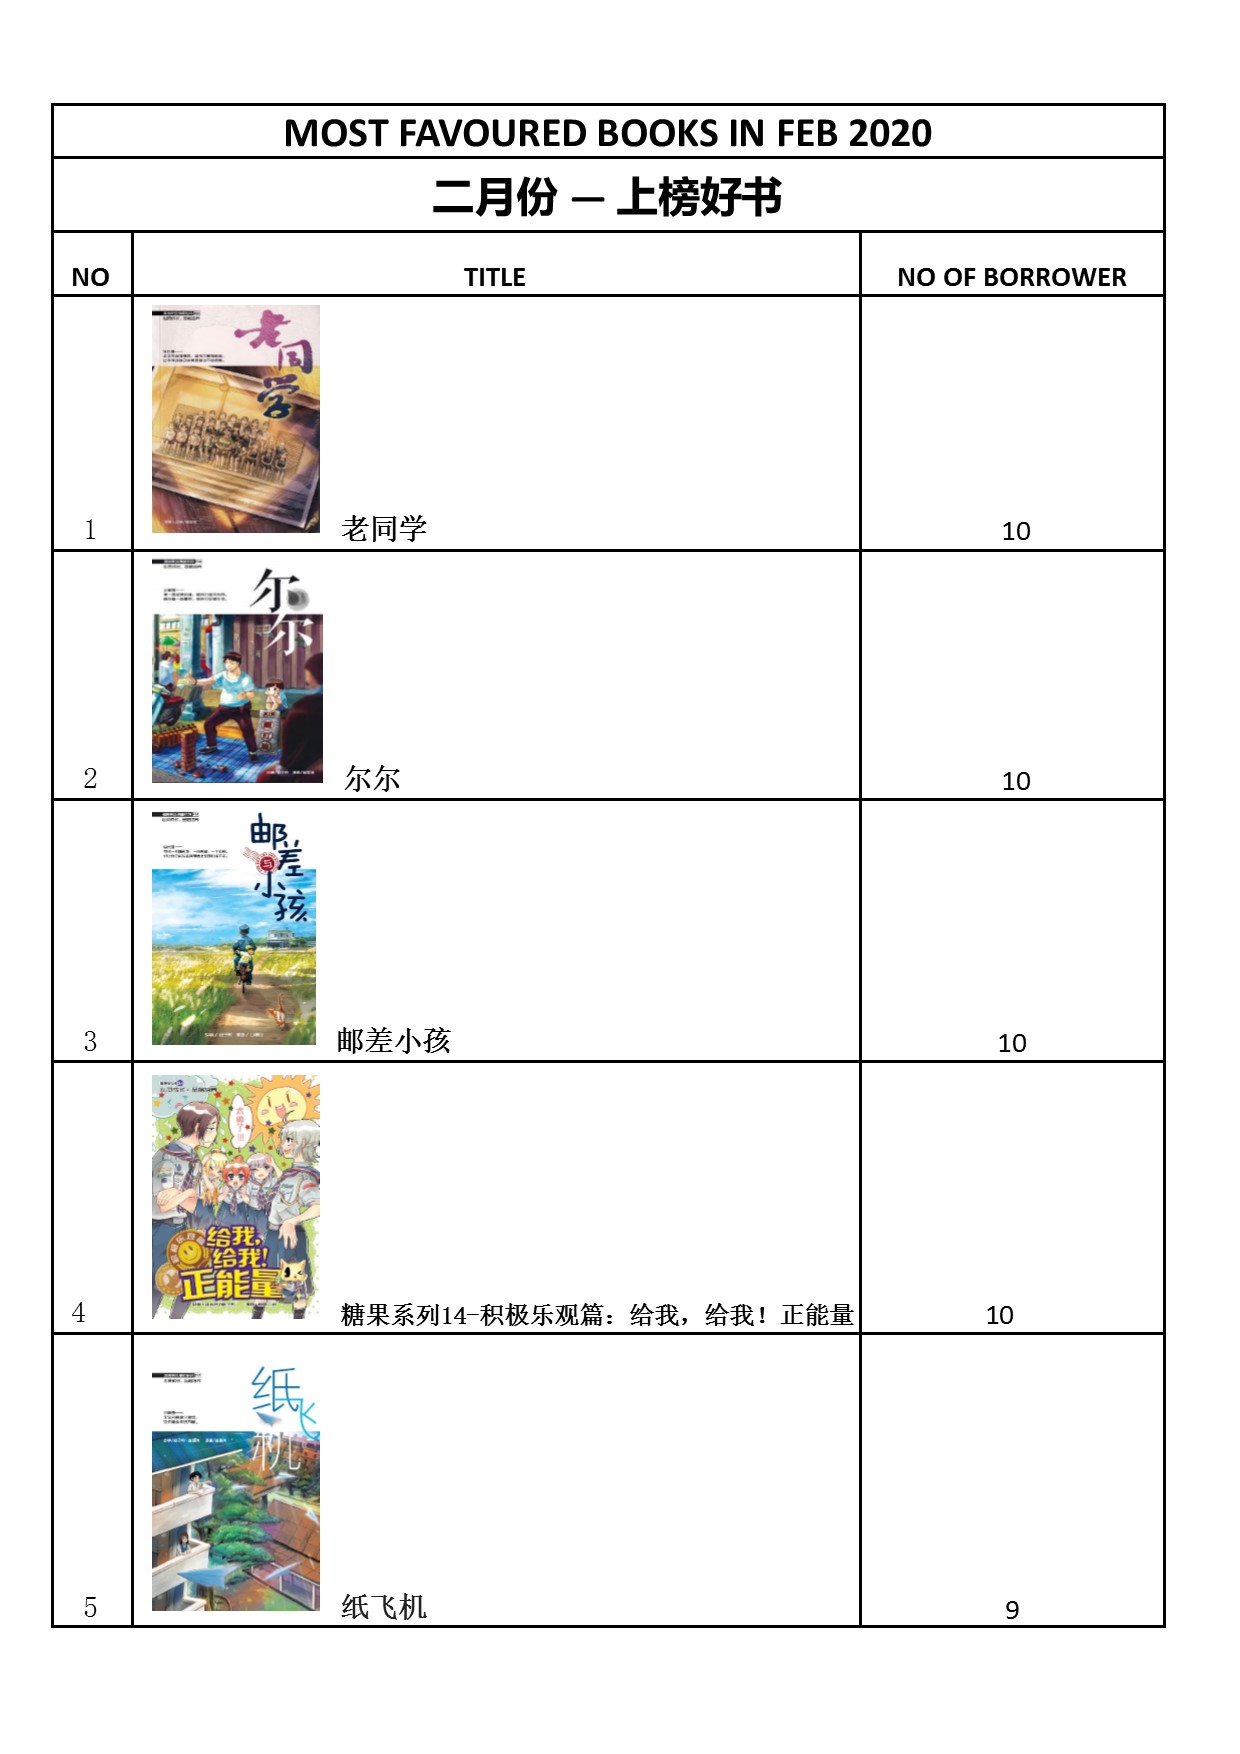 MOST FAVOURED BOOKS IN FEB 2020